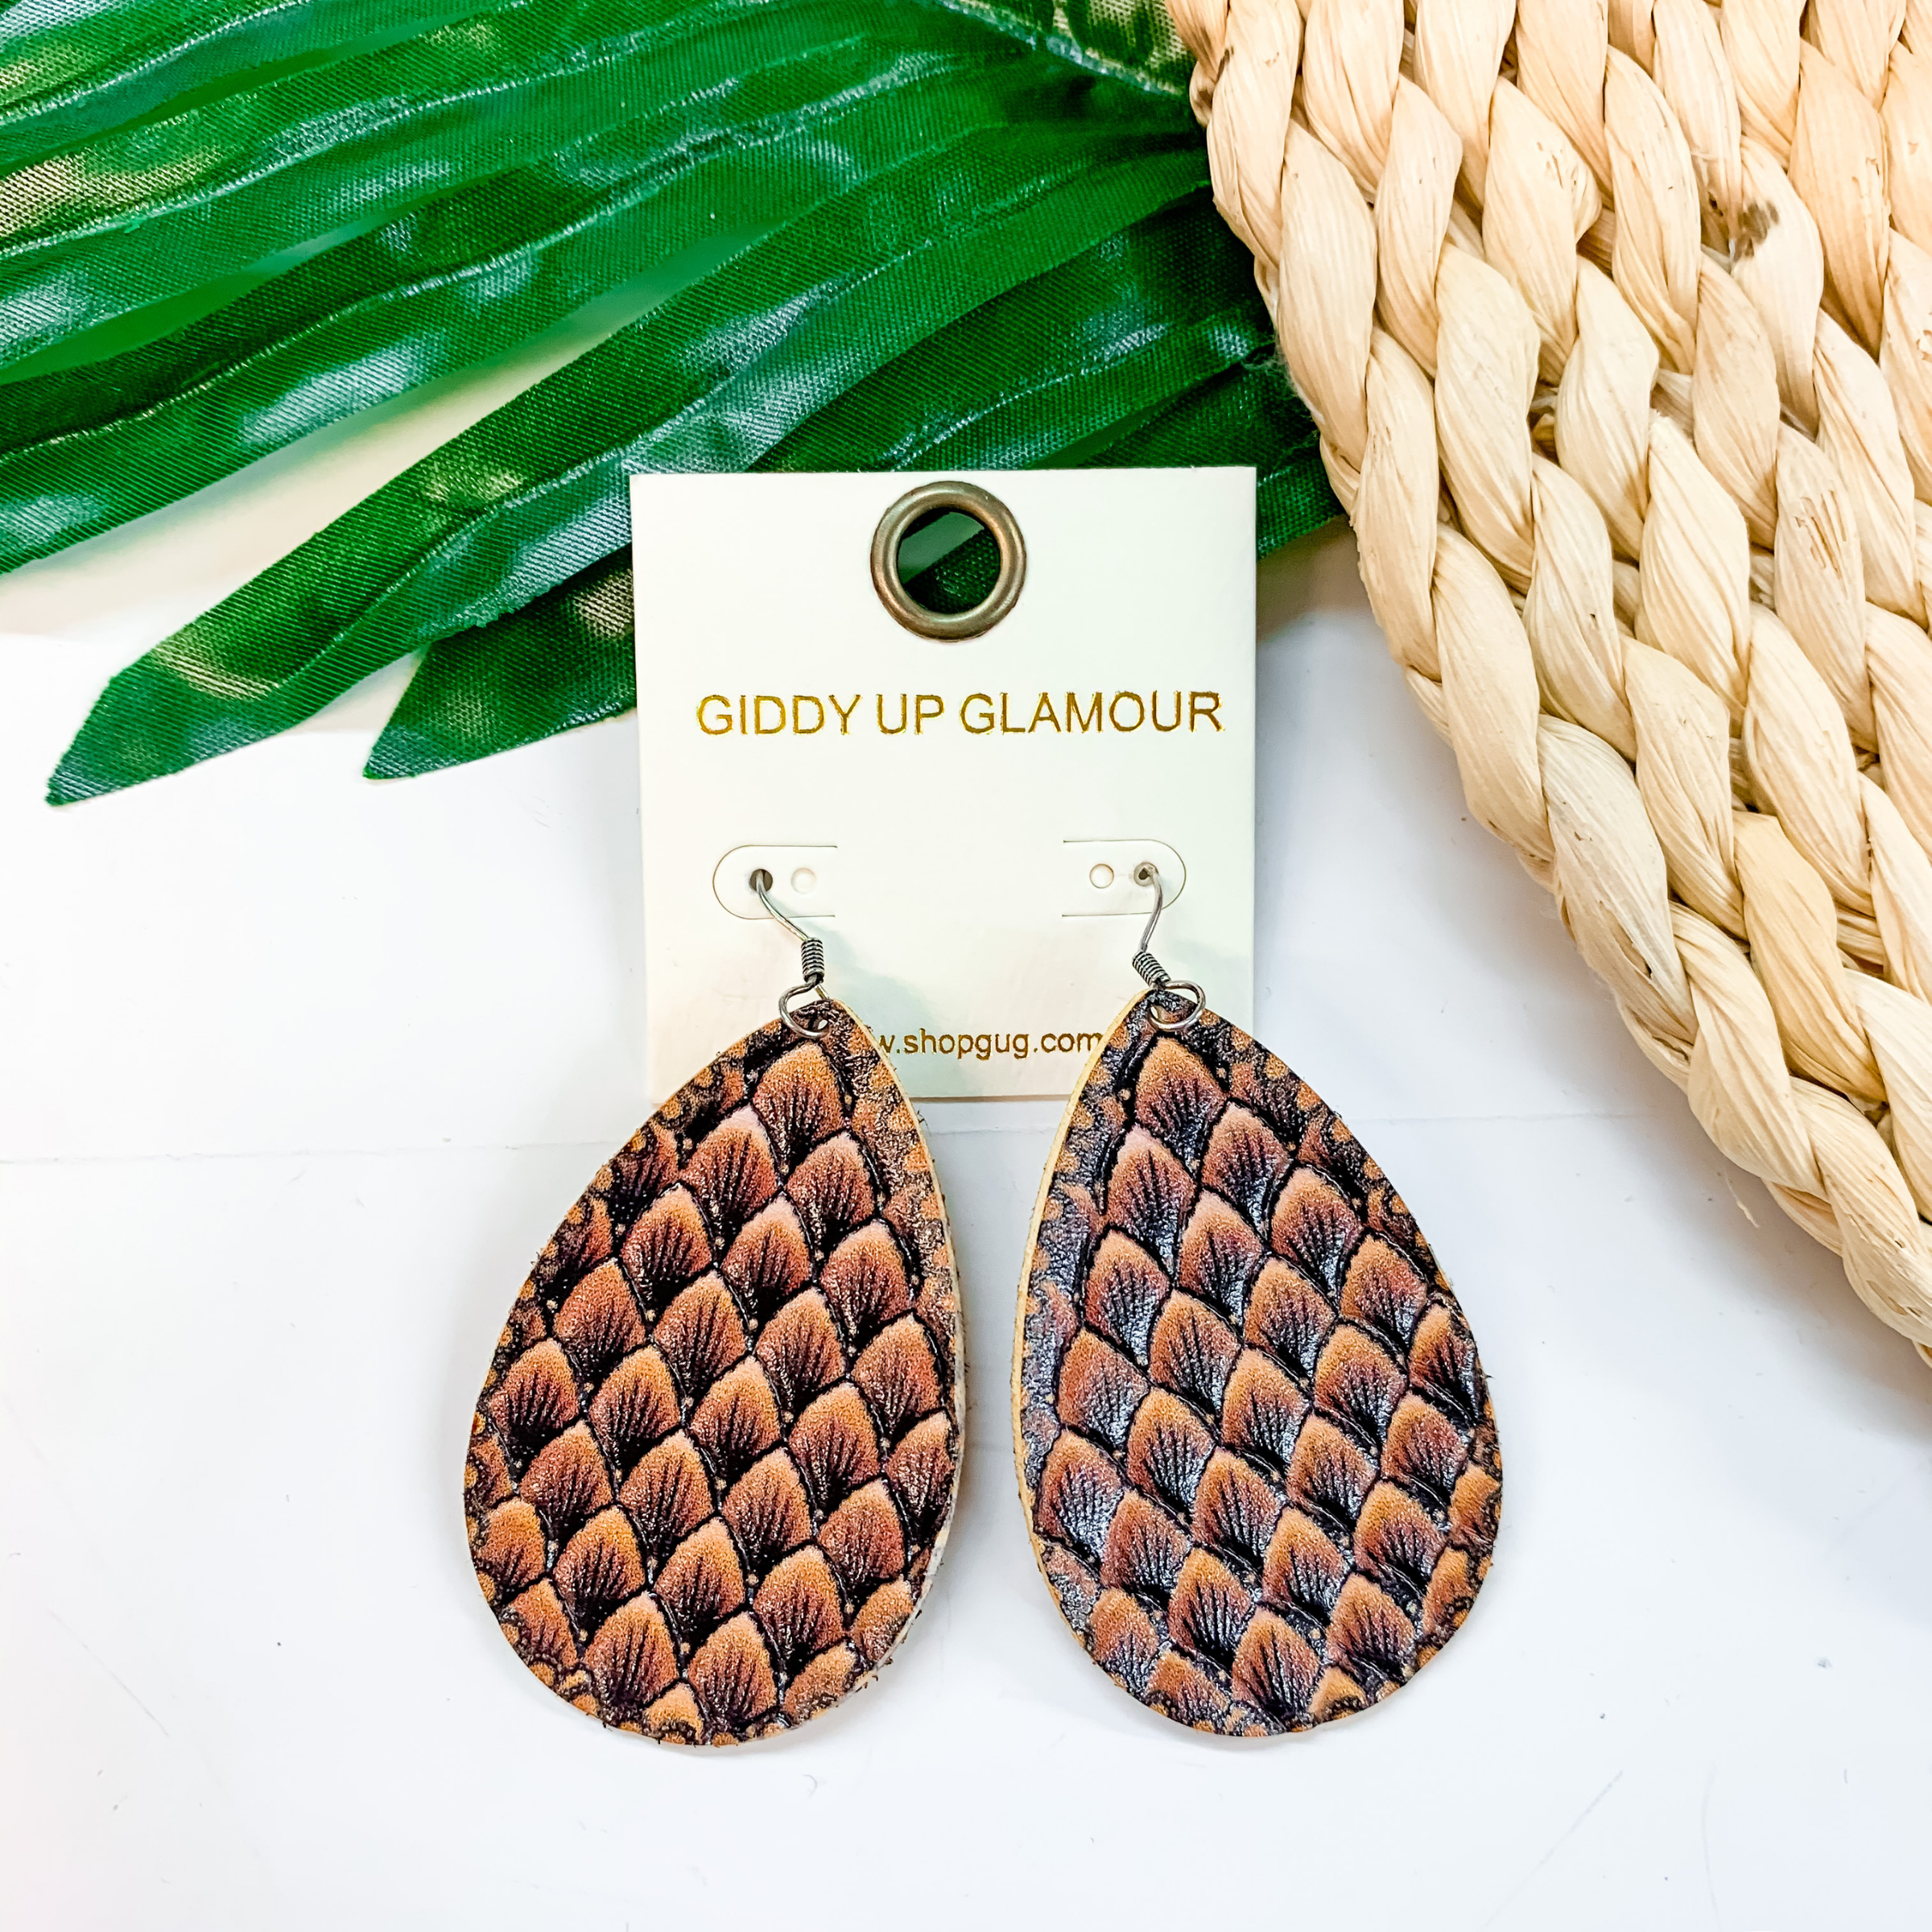 Patterned Leather Teardrop Earrings - Giddy Up Glamour Boutique